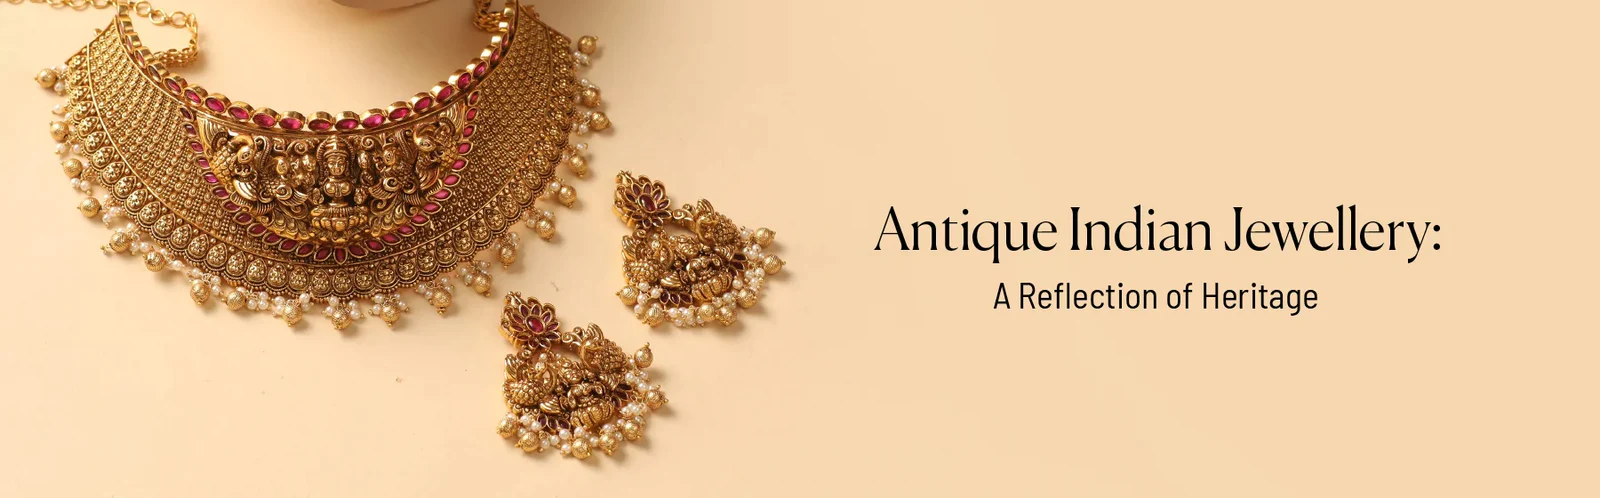 payment-provider-for-antique-jewelry-in-india